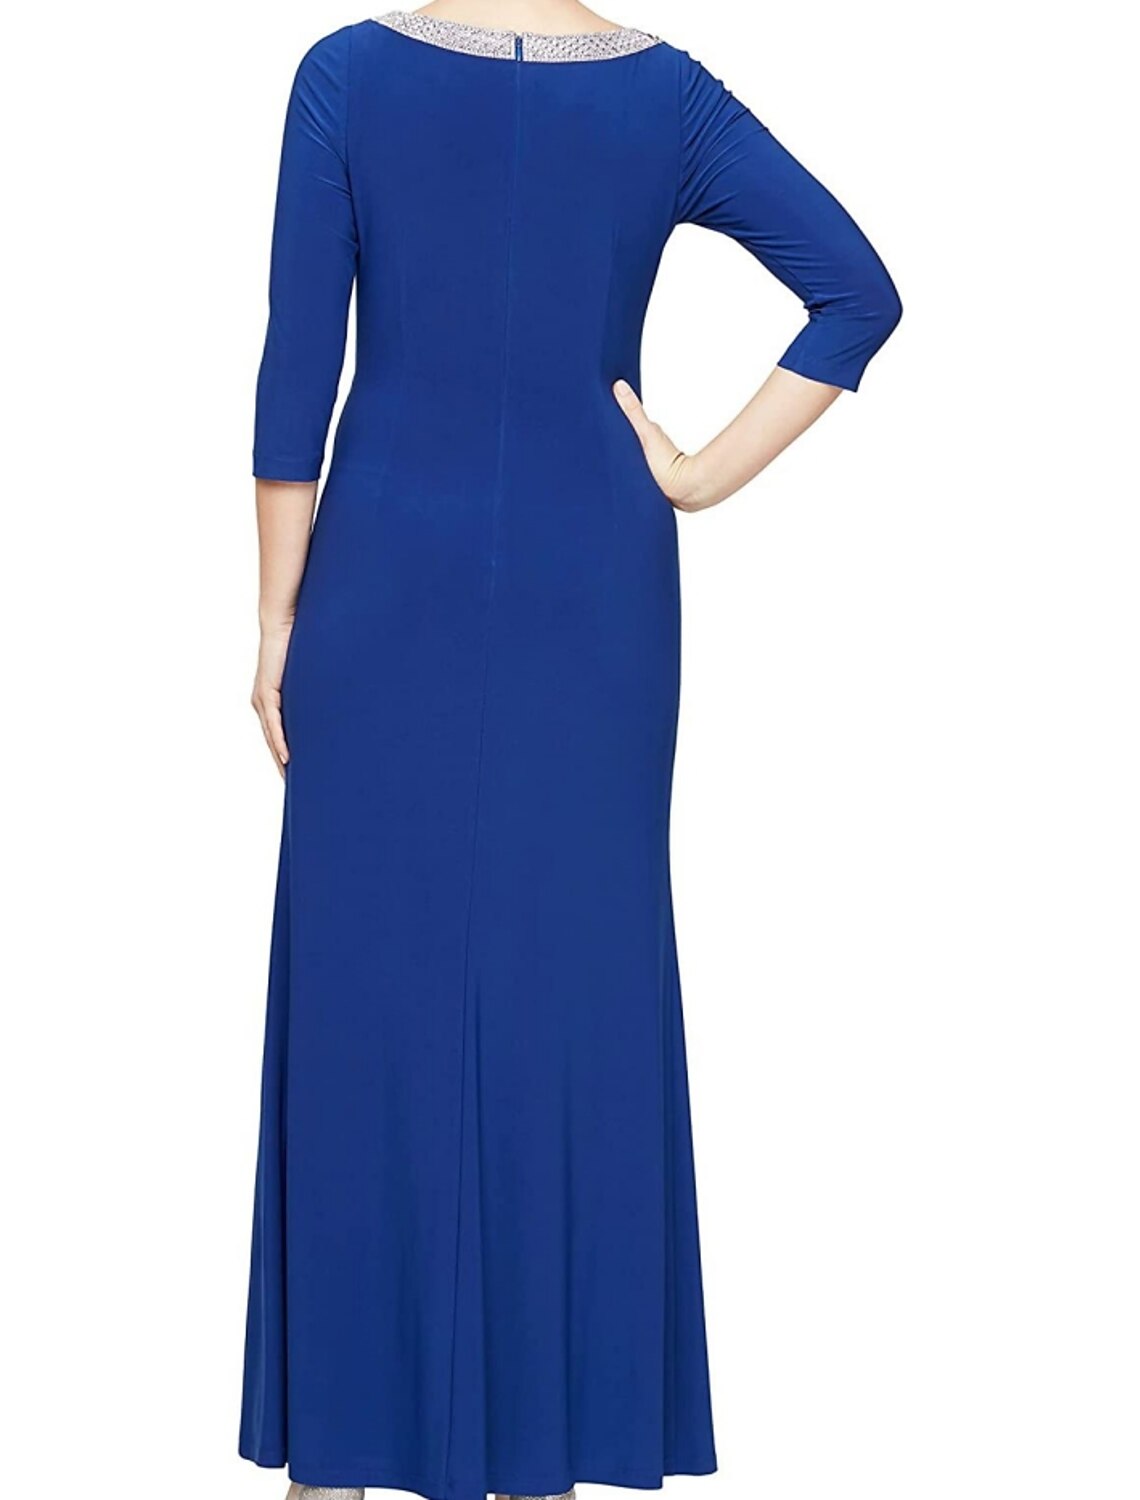 Sheath / Column Mother of the Bride Dress Wedding Guest Elegant Scoop Neck Ankle Length Chiffon Half Sleeve with Crystals Ruching Solid Color